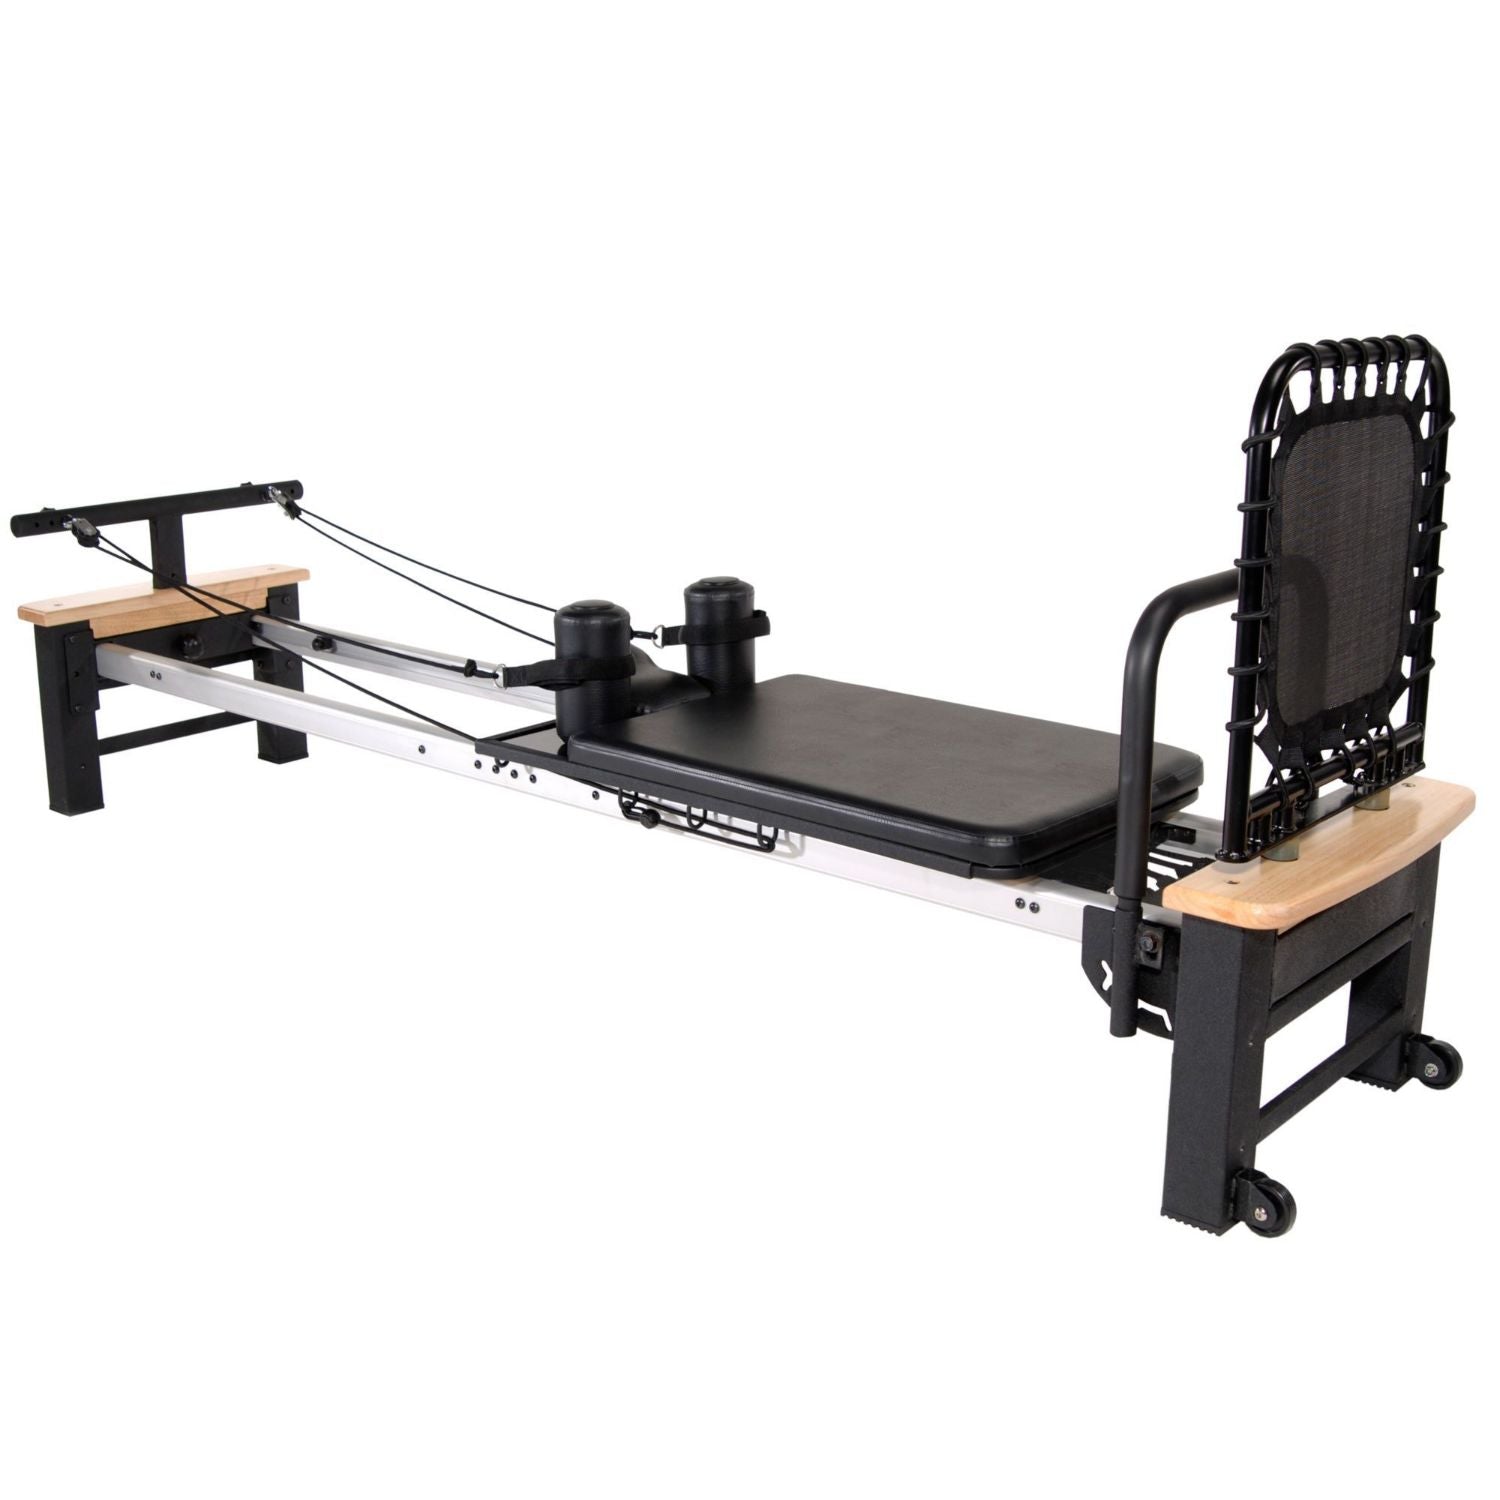 AeroPilates Reformer Plus 379 - Pilates Reformer Workout Machine for Home  Gym - Cardio Fitness Rebounder - Up to 300 lbs Weight Capacity